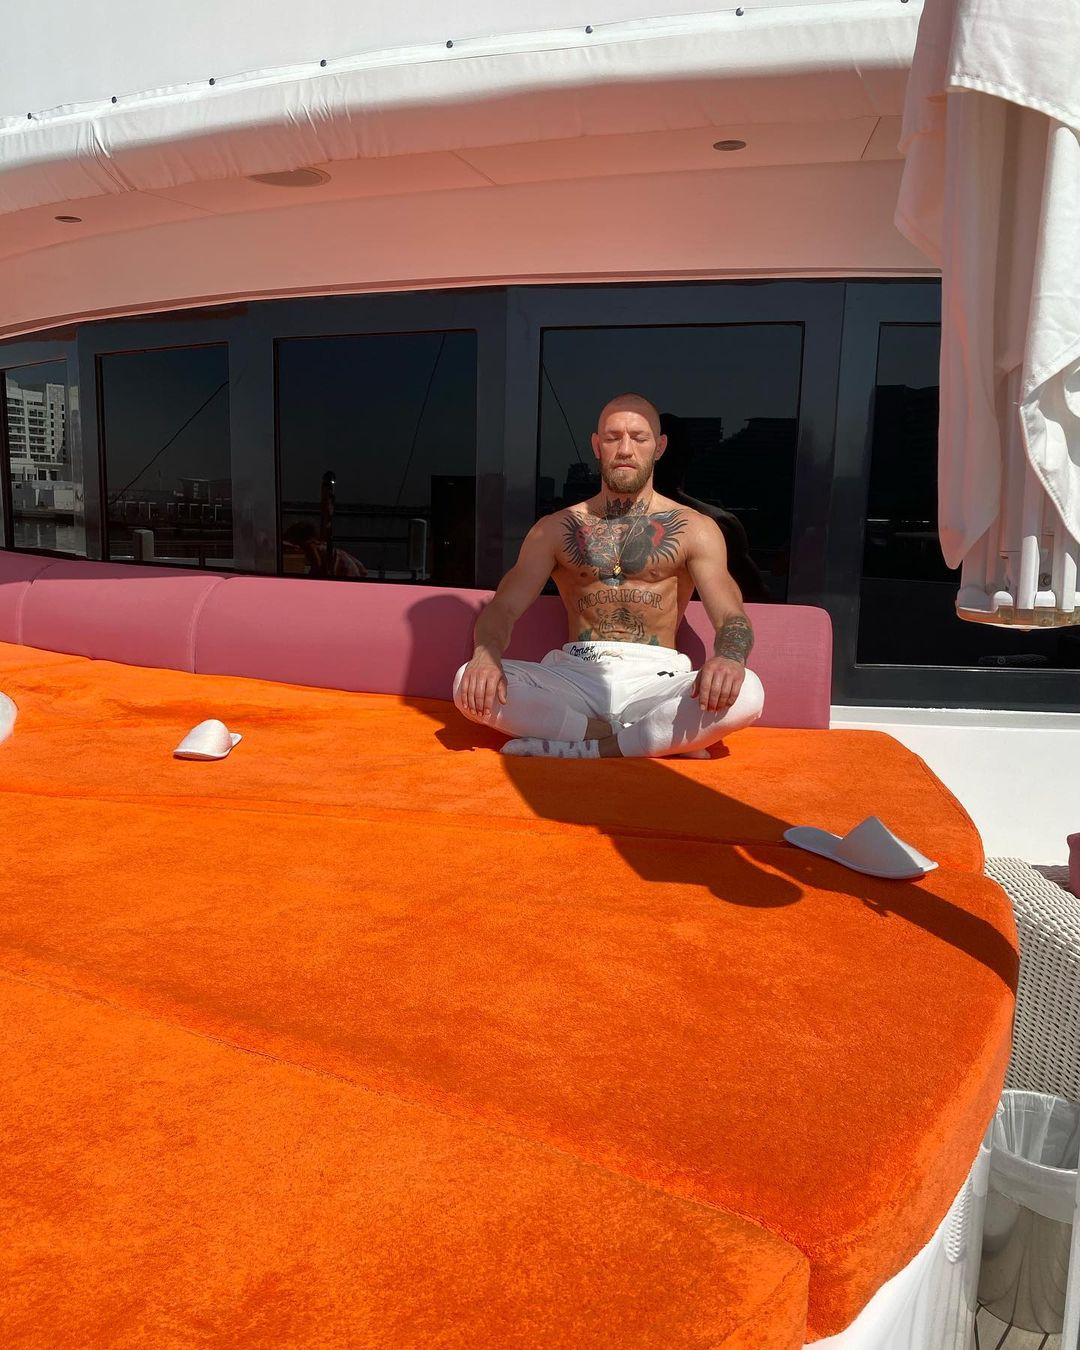 Conor McGregor's luxury yacht, which he took to Fight Island to see Dustin Poirier in the UFC 257 fight.